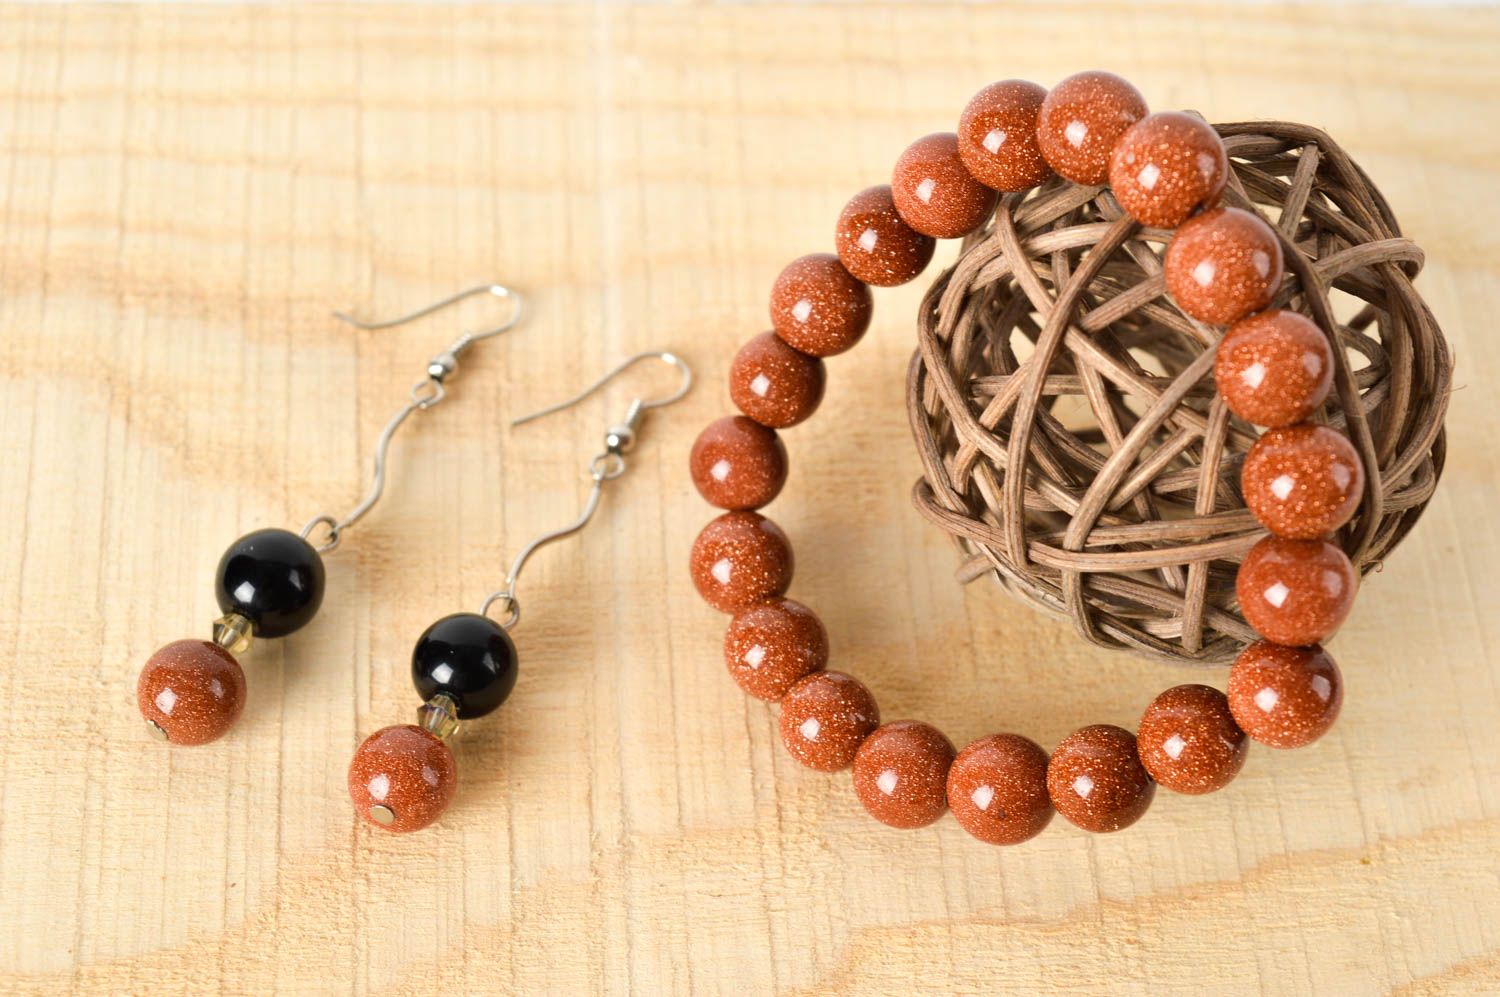 Handmade earrings designer bracelet jewelry set accessory with natural stones photo 1